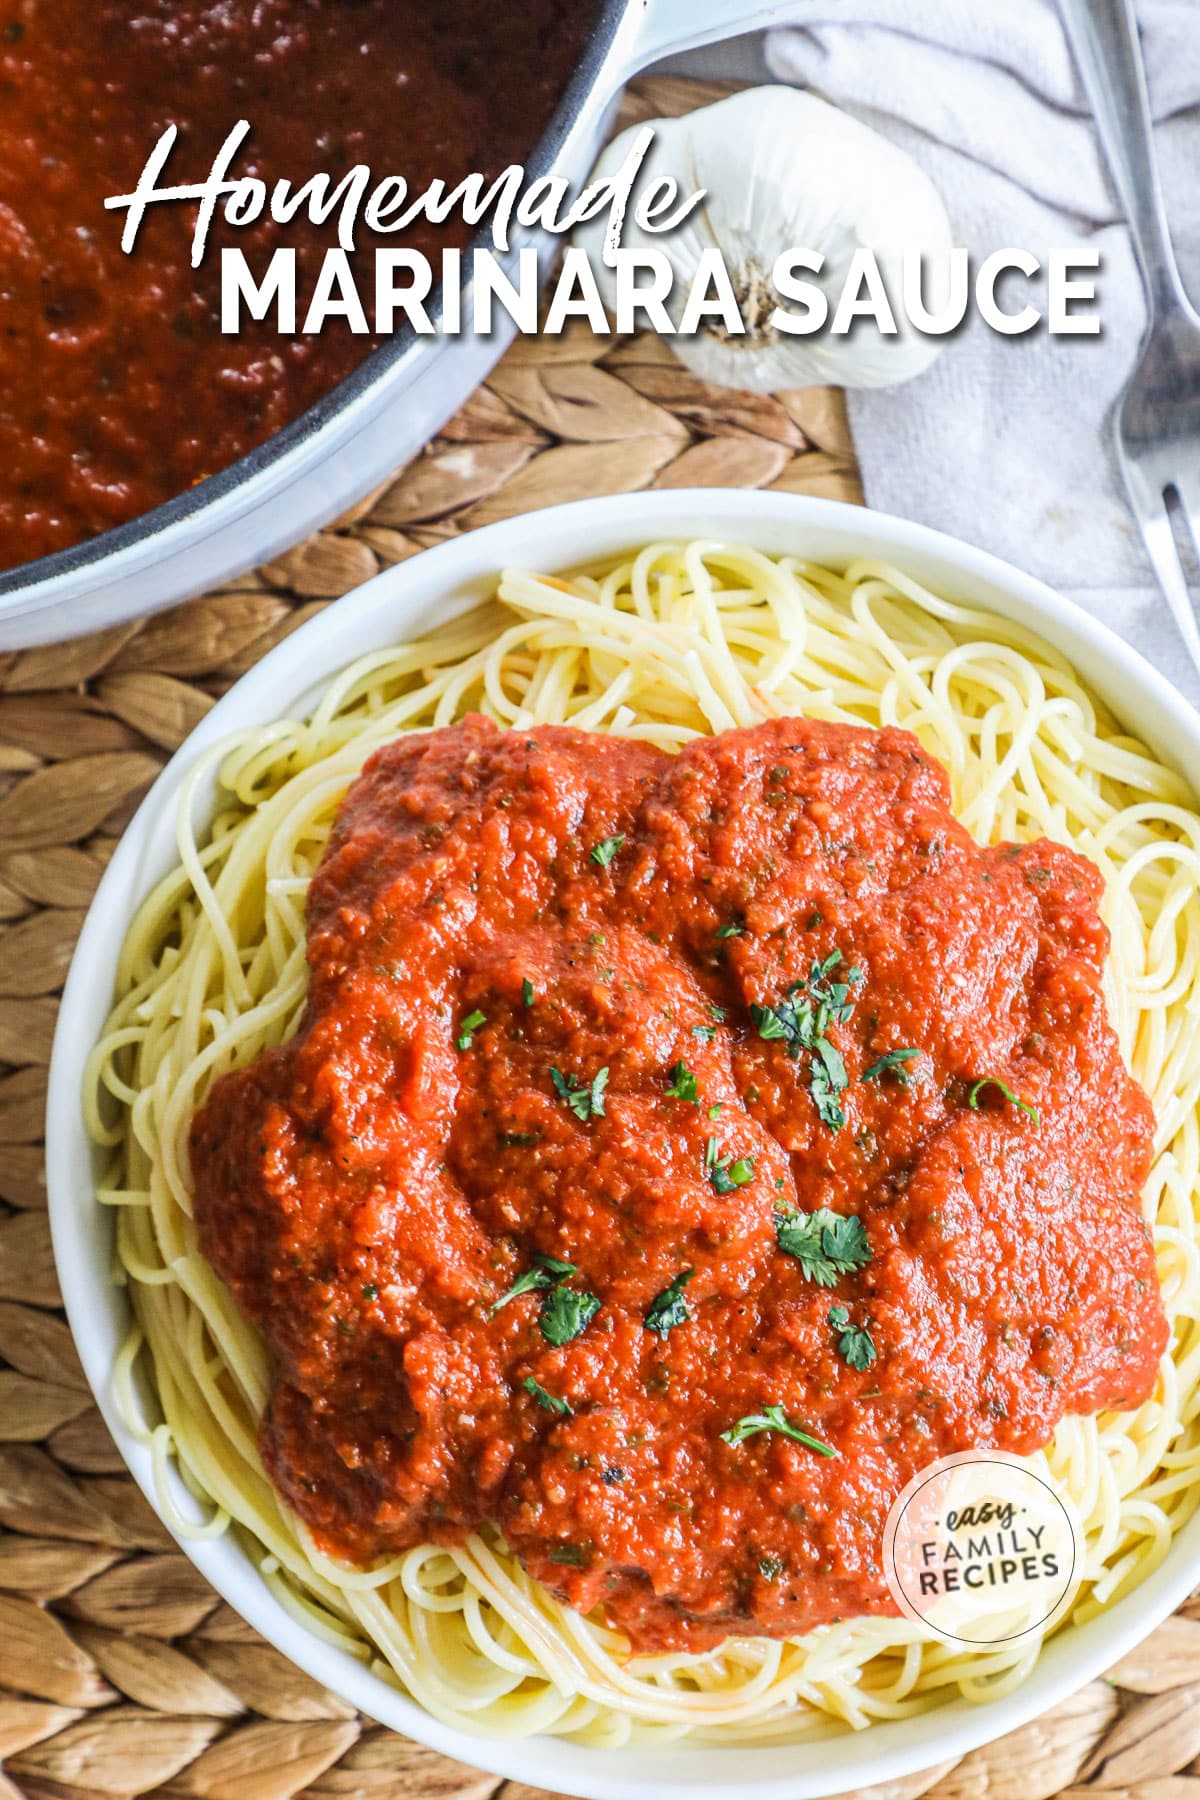 above image of a plate of spaghetti piled with homemade marinara sauce.